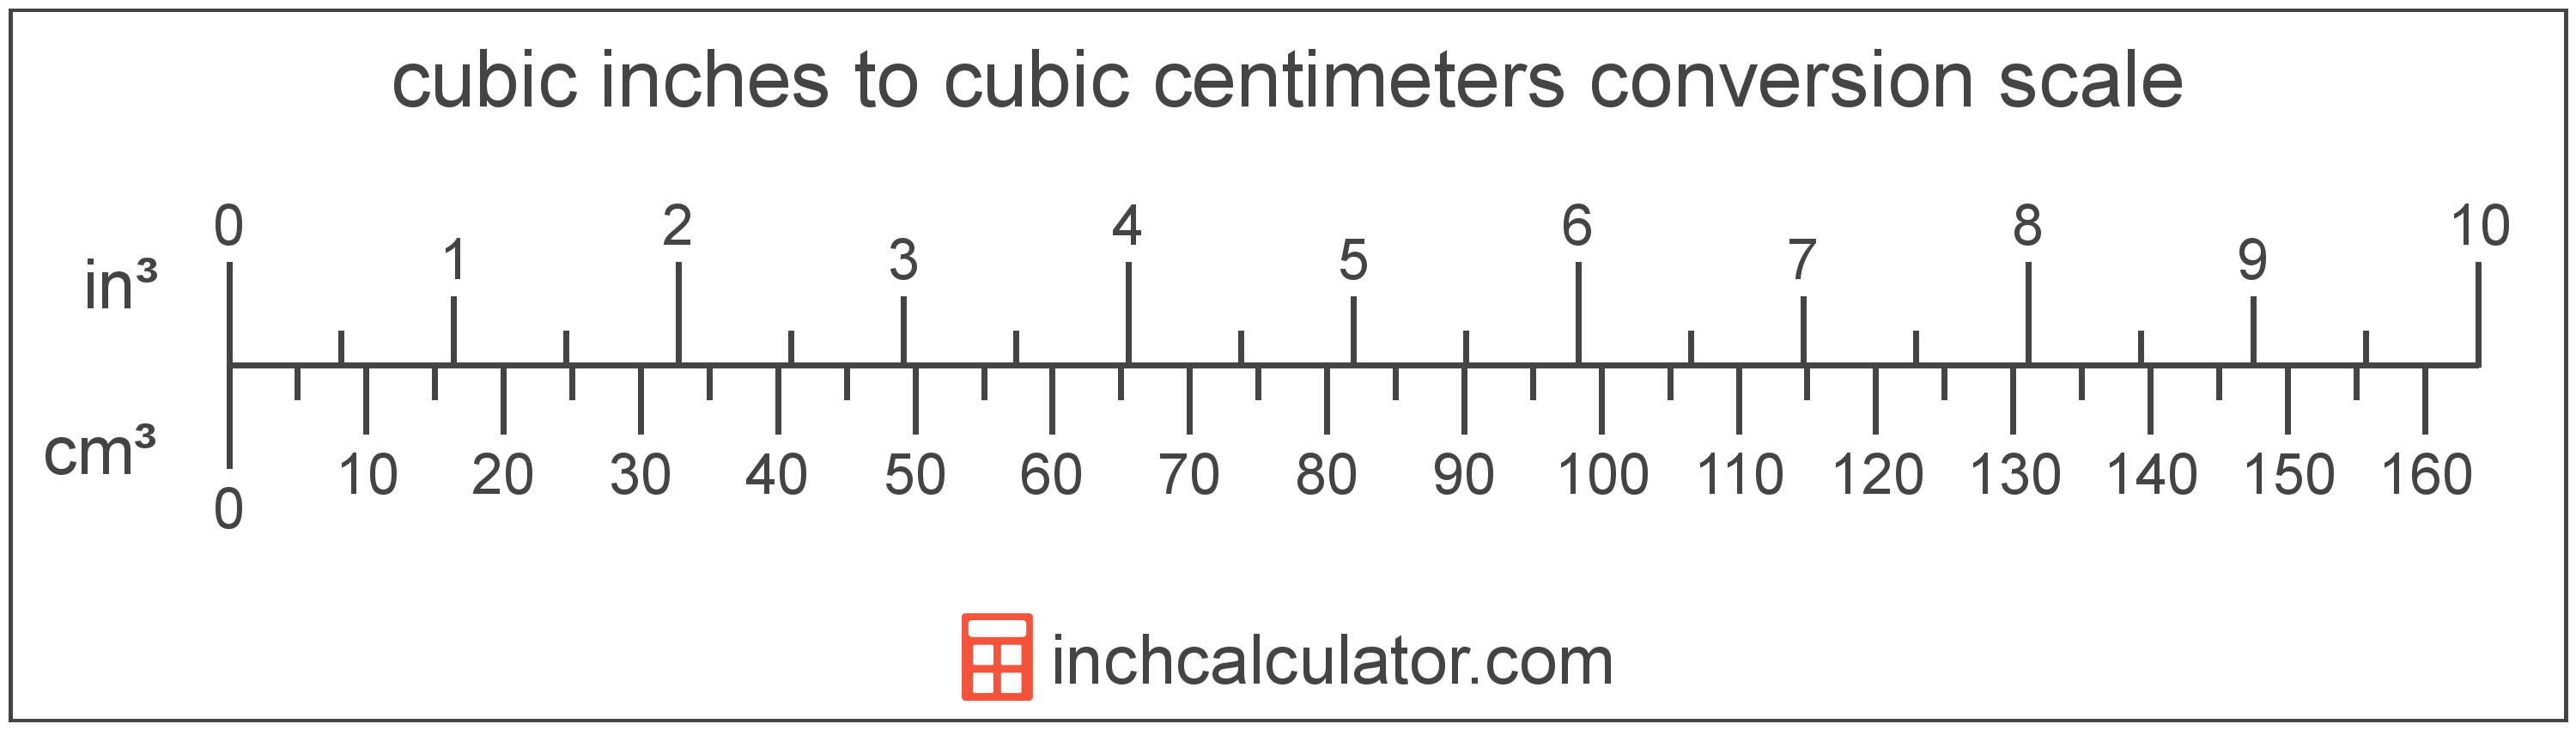 conversion scale showing cubic inches and equivalent cubic centimeters volume values